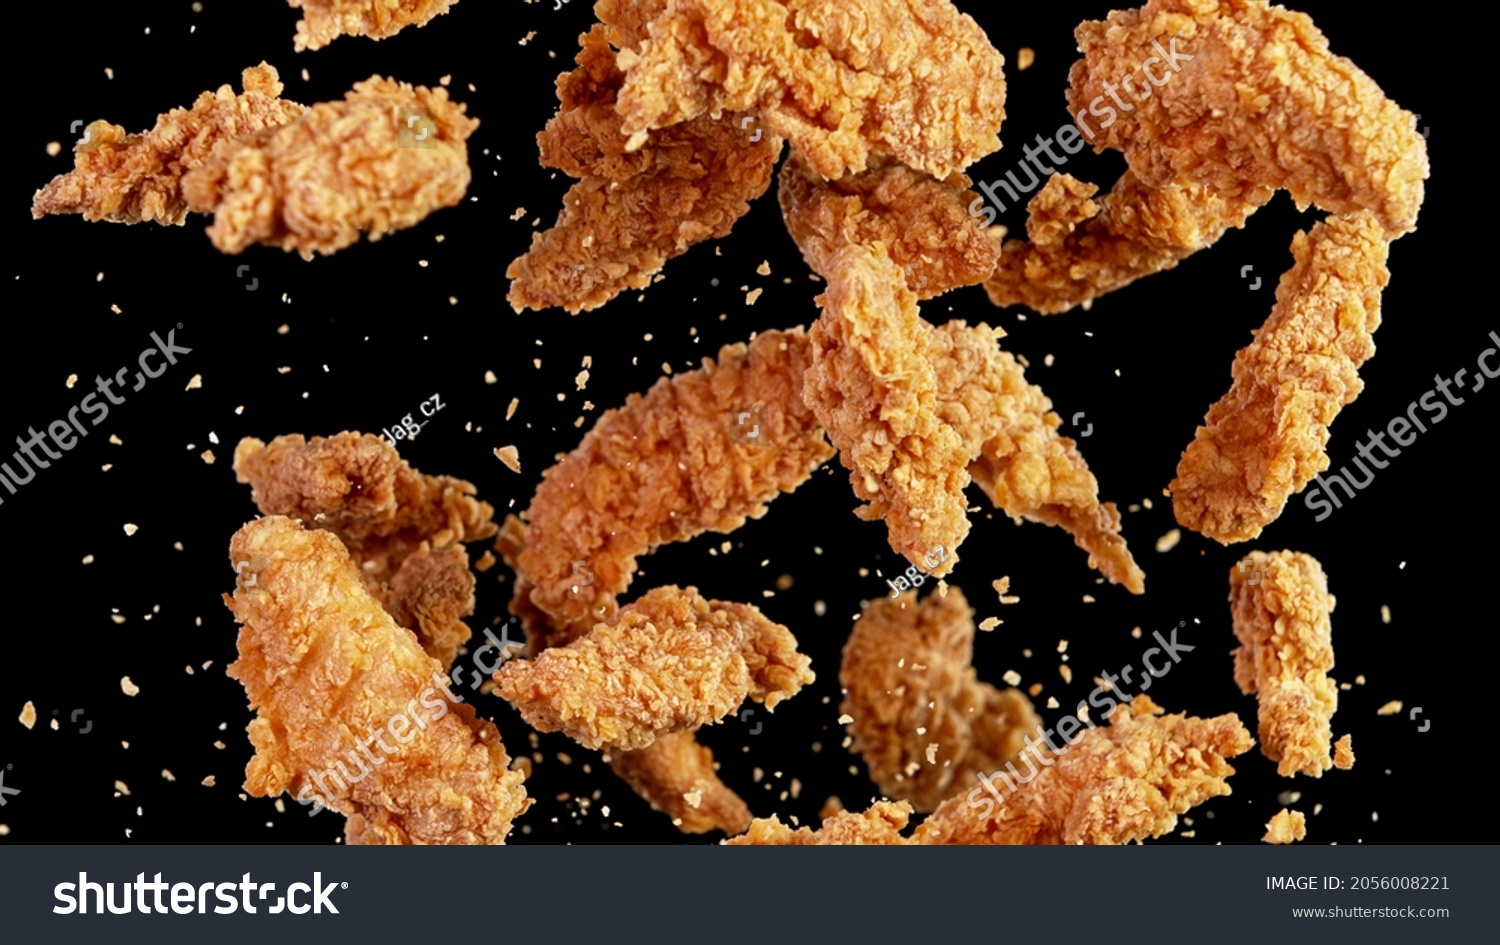 Freeze motion of flying pieces of fried chicken pieces on black background. Concept of levitating food. #2056008221